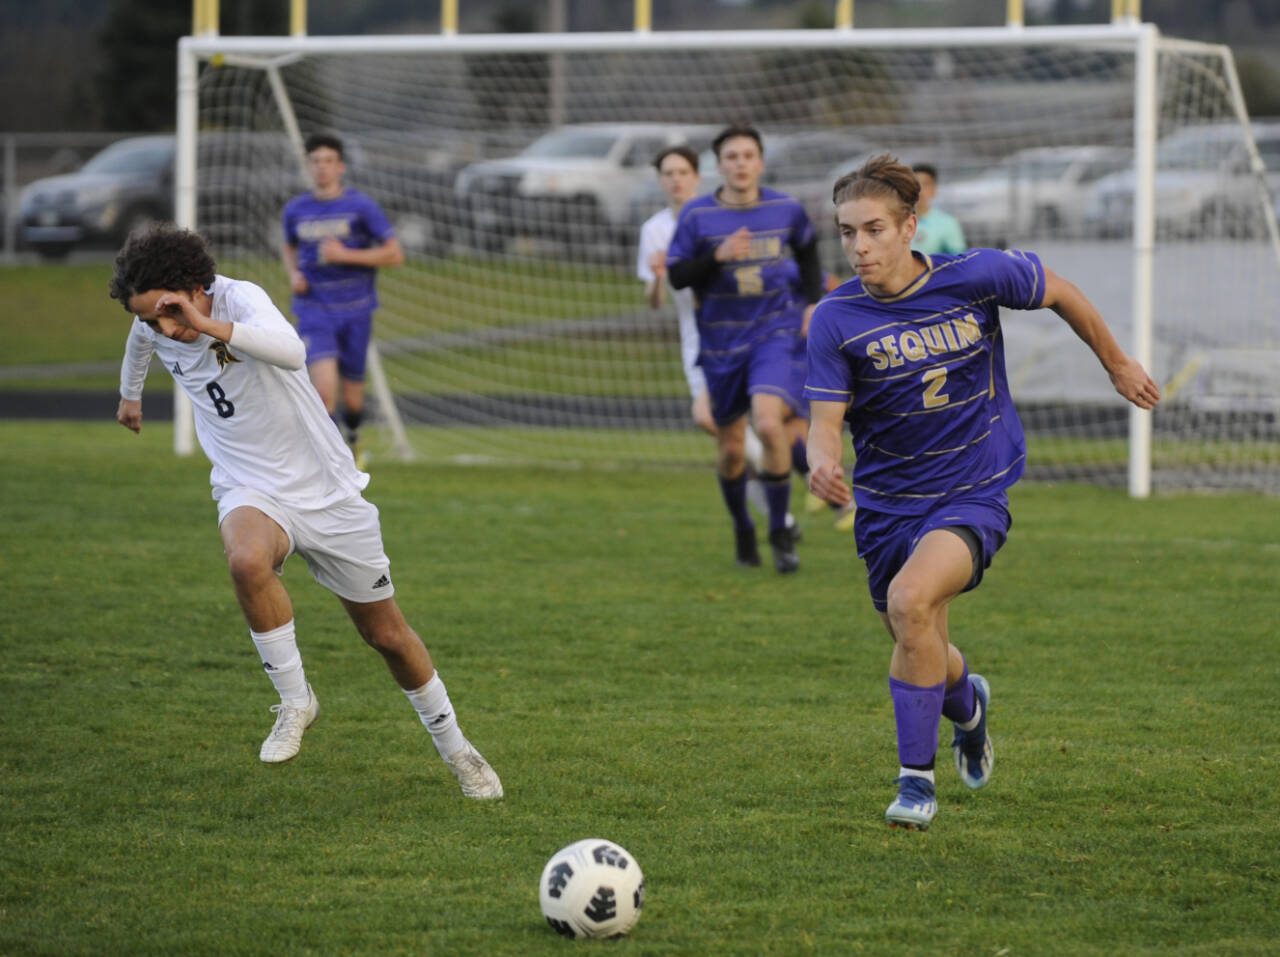 Sequim Gazette photo by Michael Dashiell / Sequim’s Preston Kurtze, right, dribbles downfield and looks for a teammate in the Wolves’ 3-2 loss against Bainbridge on March 26.